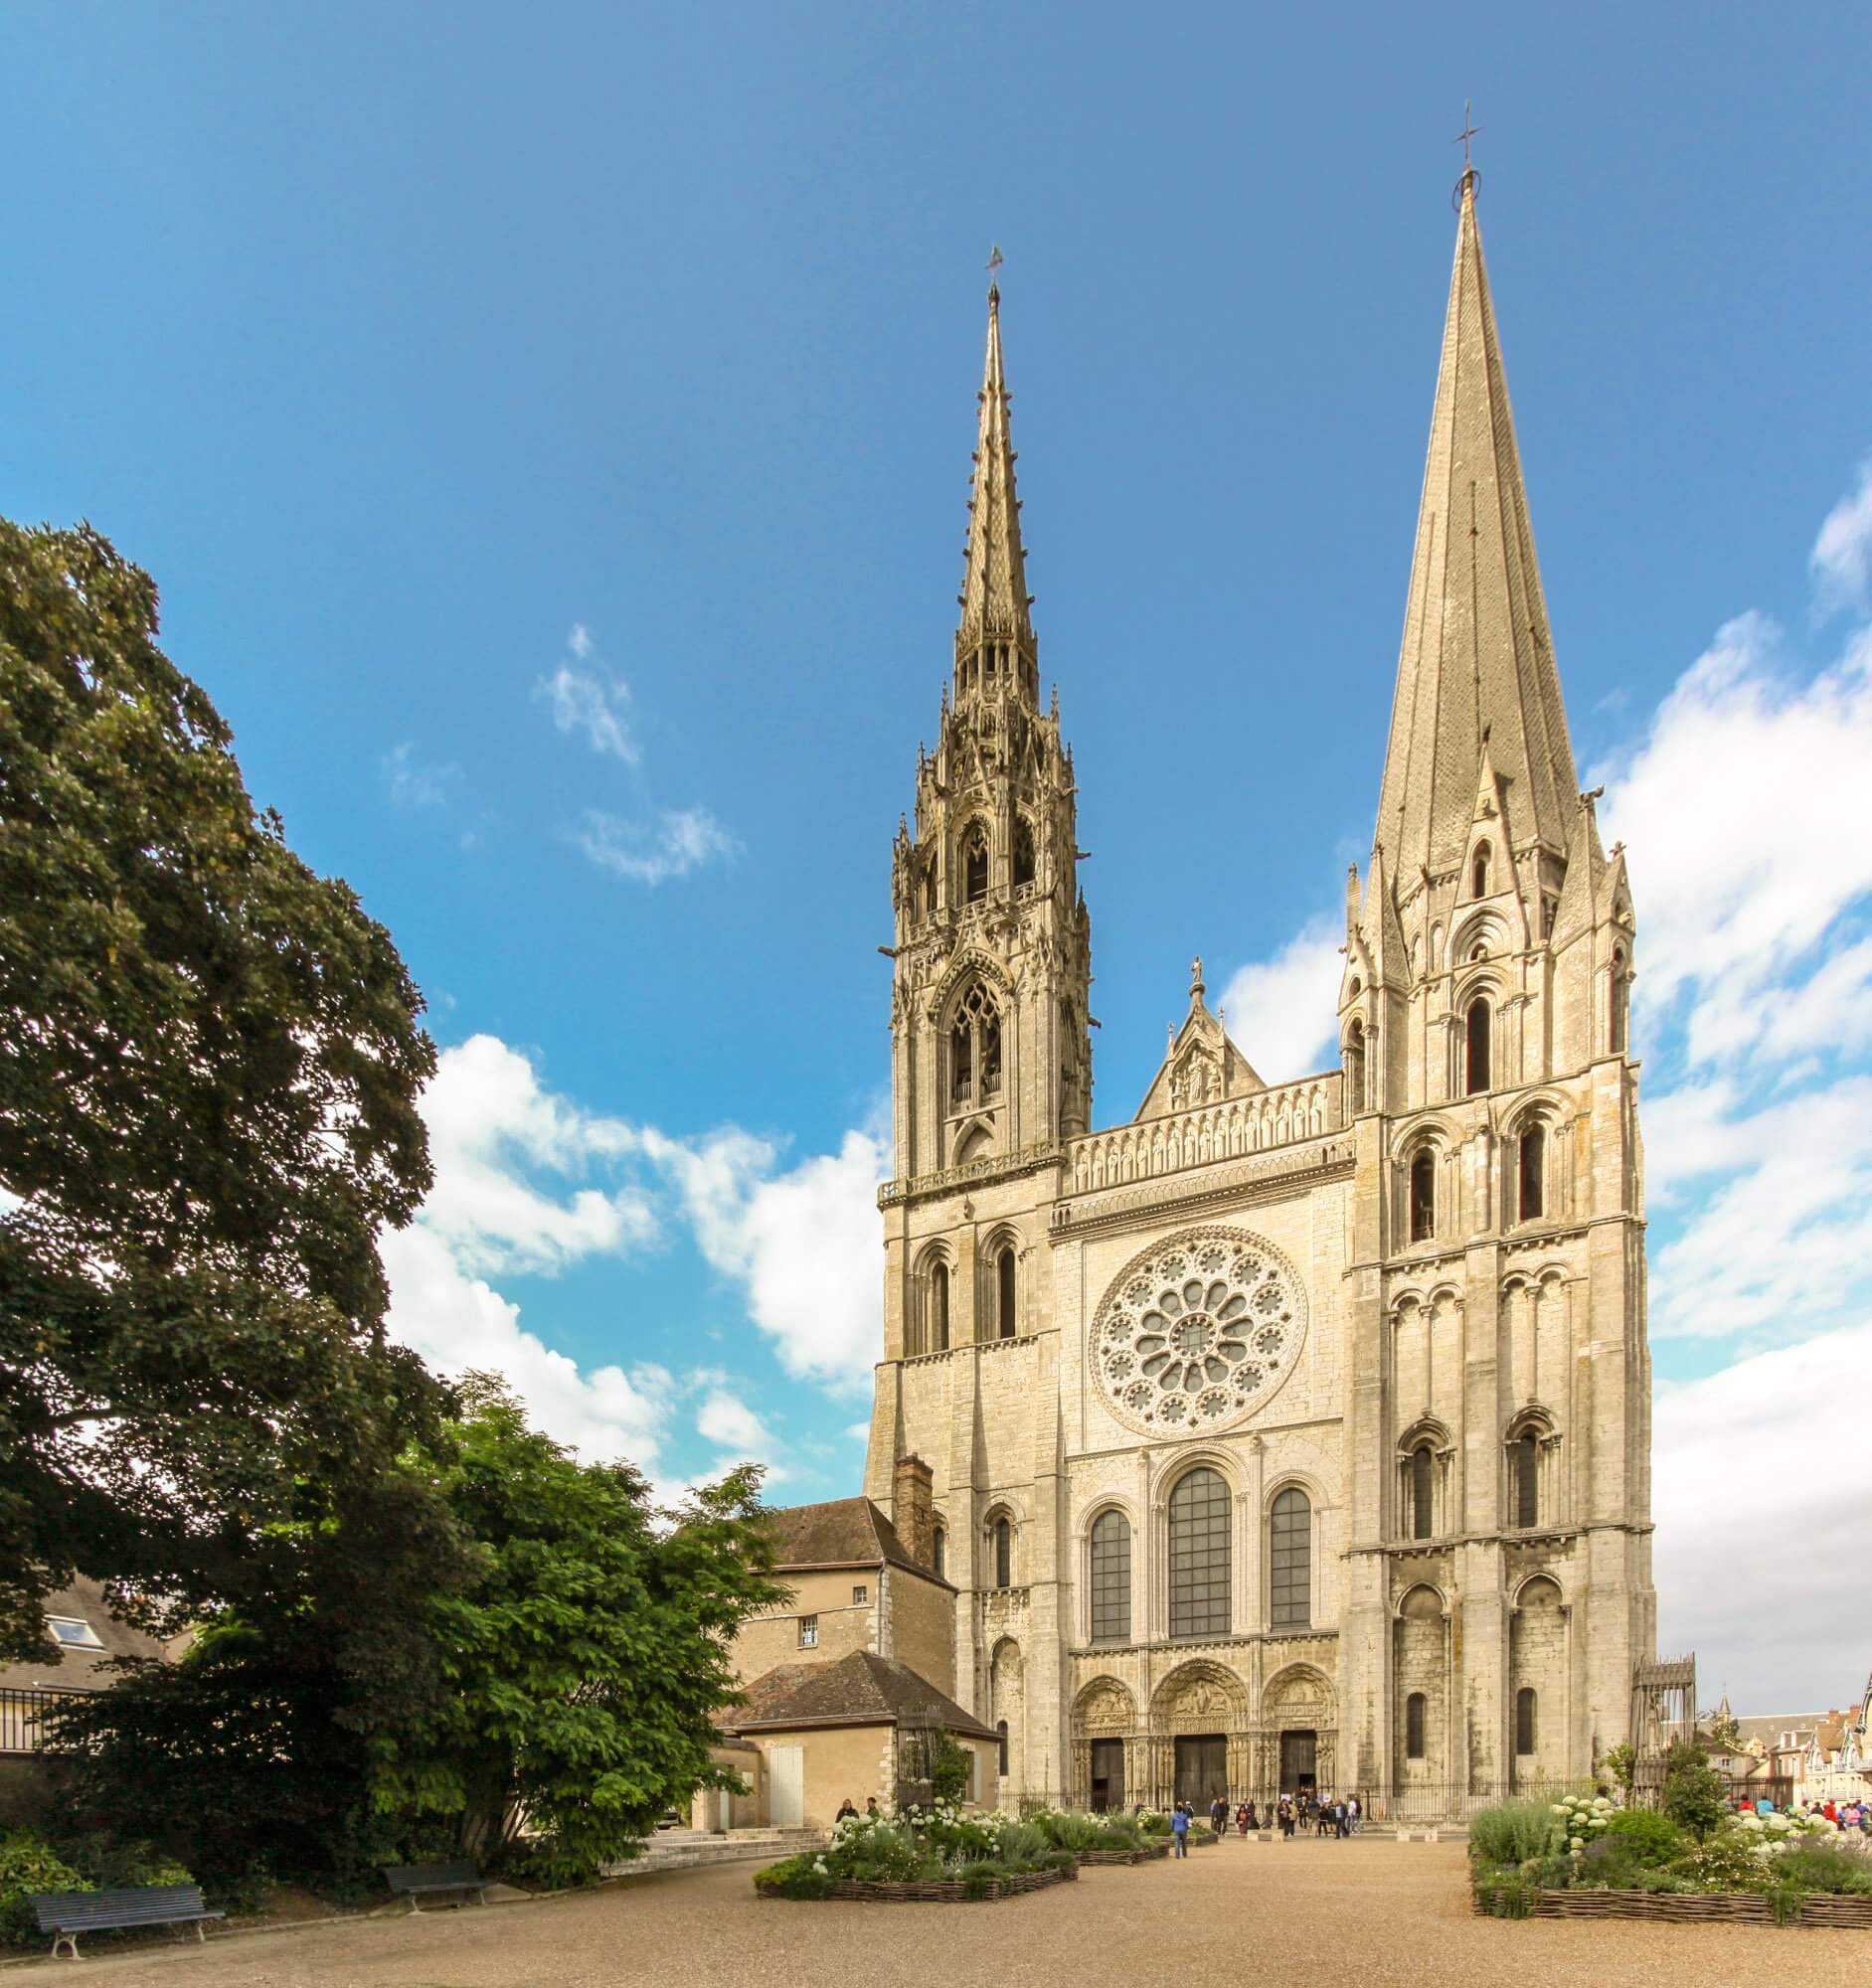 The 13th century Notre-Dame de Chartres cathedral in Chartres, France